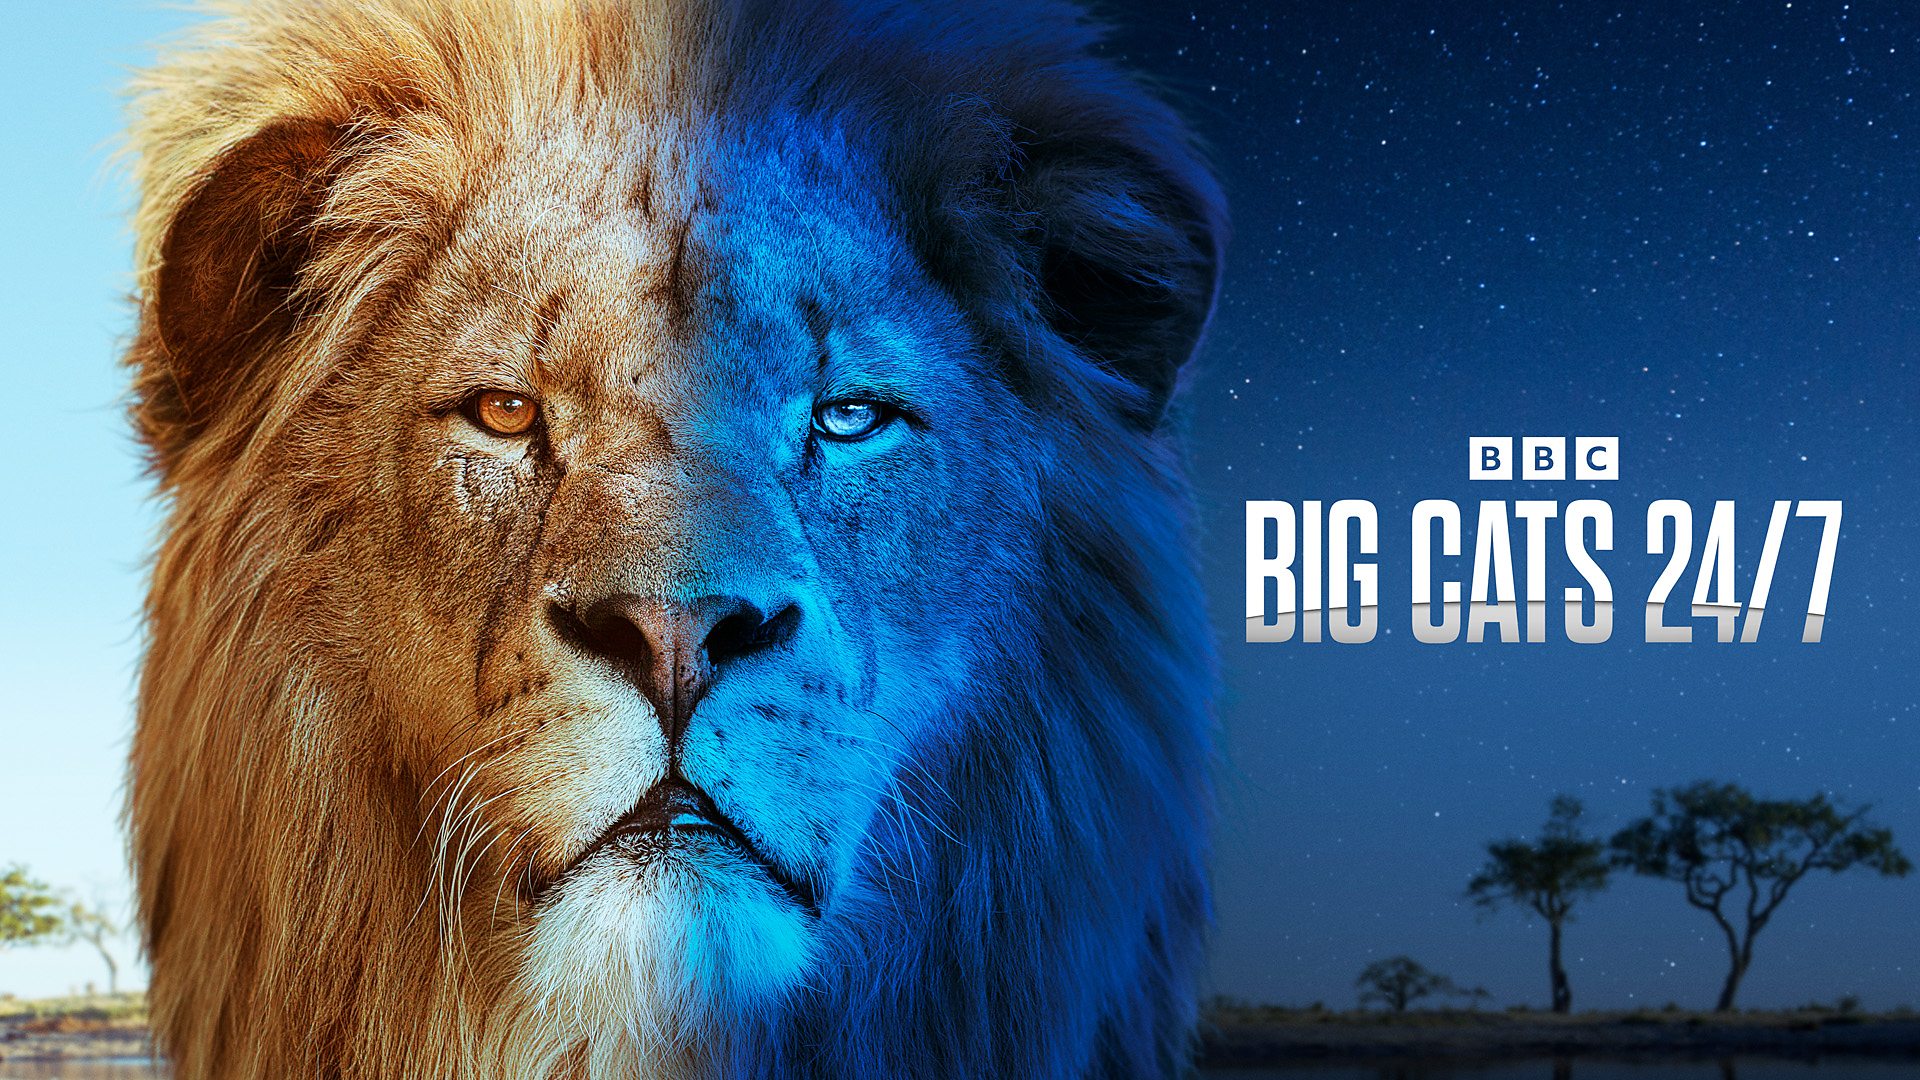 BBC Studios announces second season commission for Big Cats 24/7 ahead of first season debut